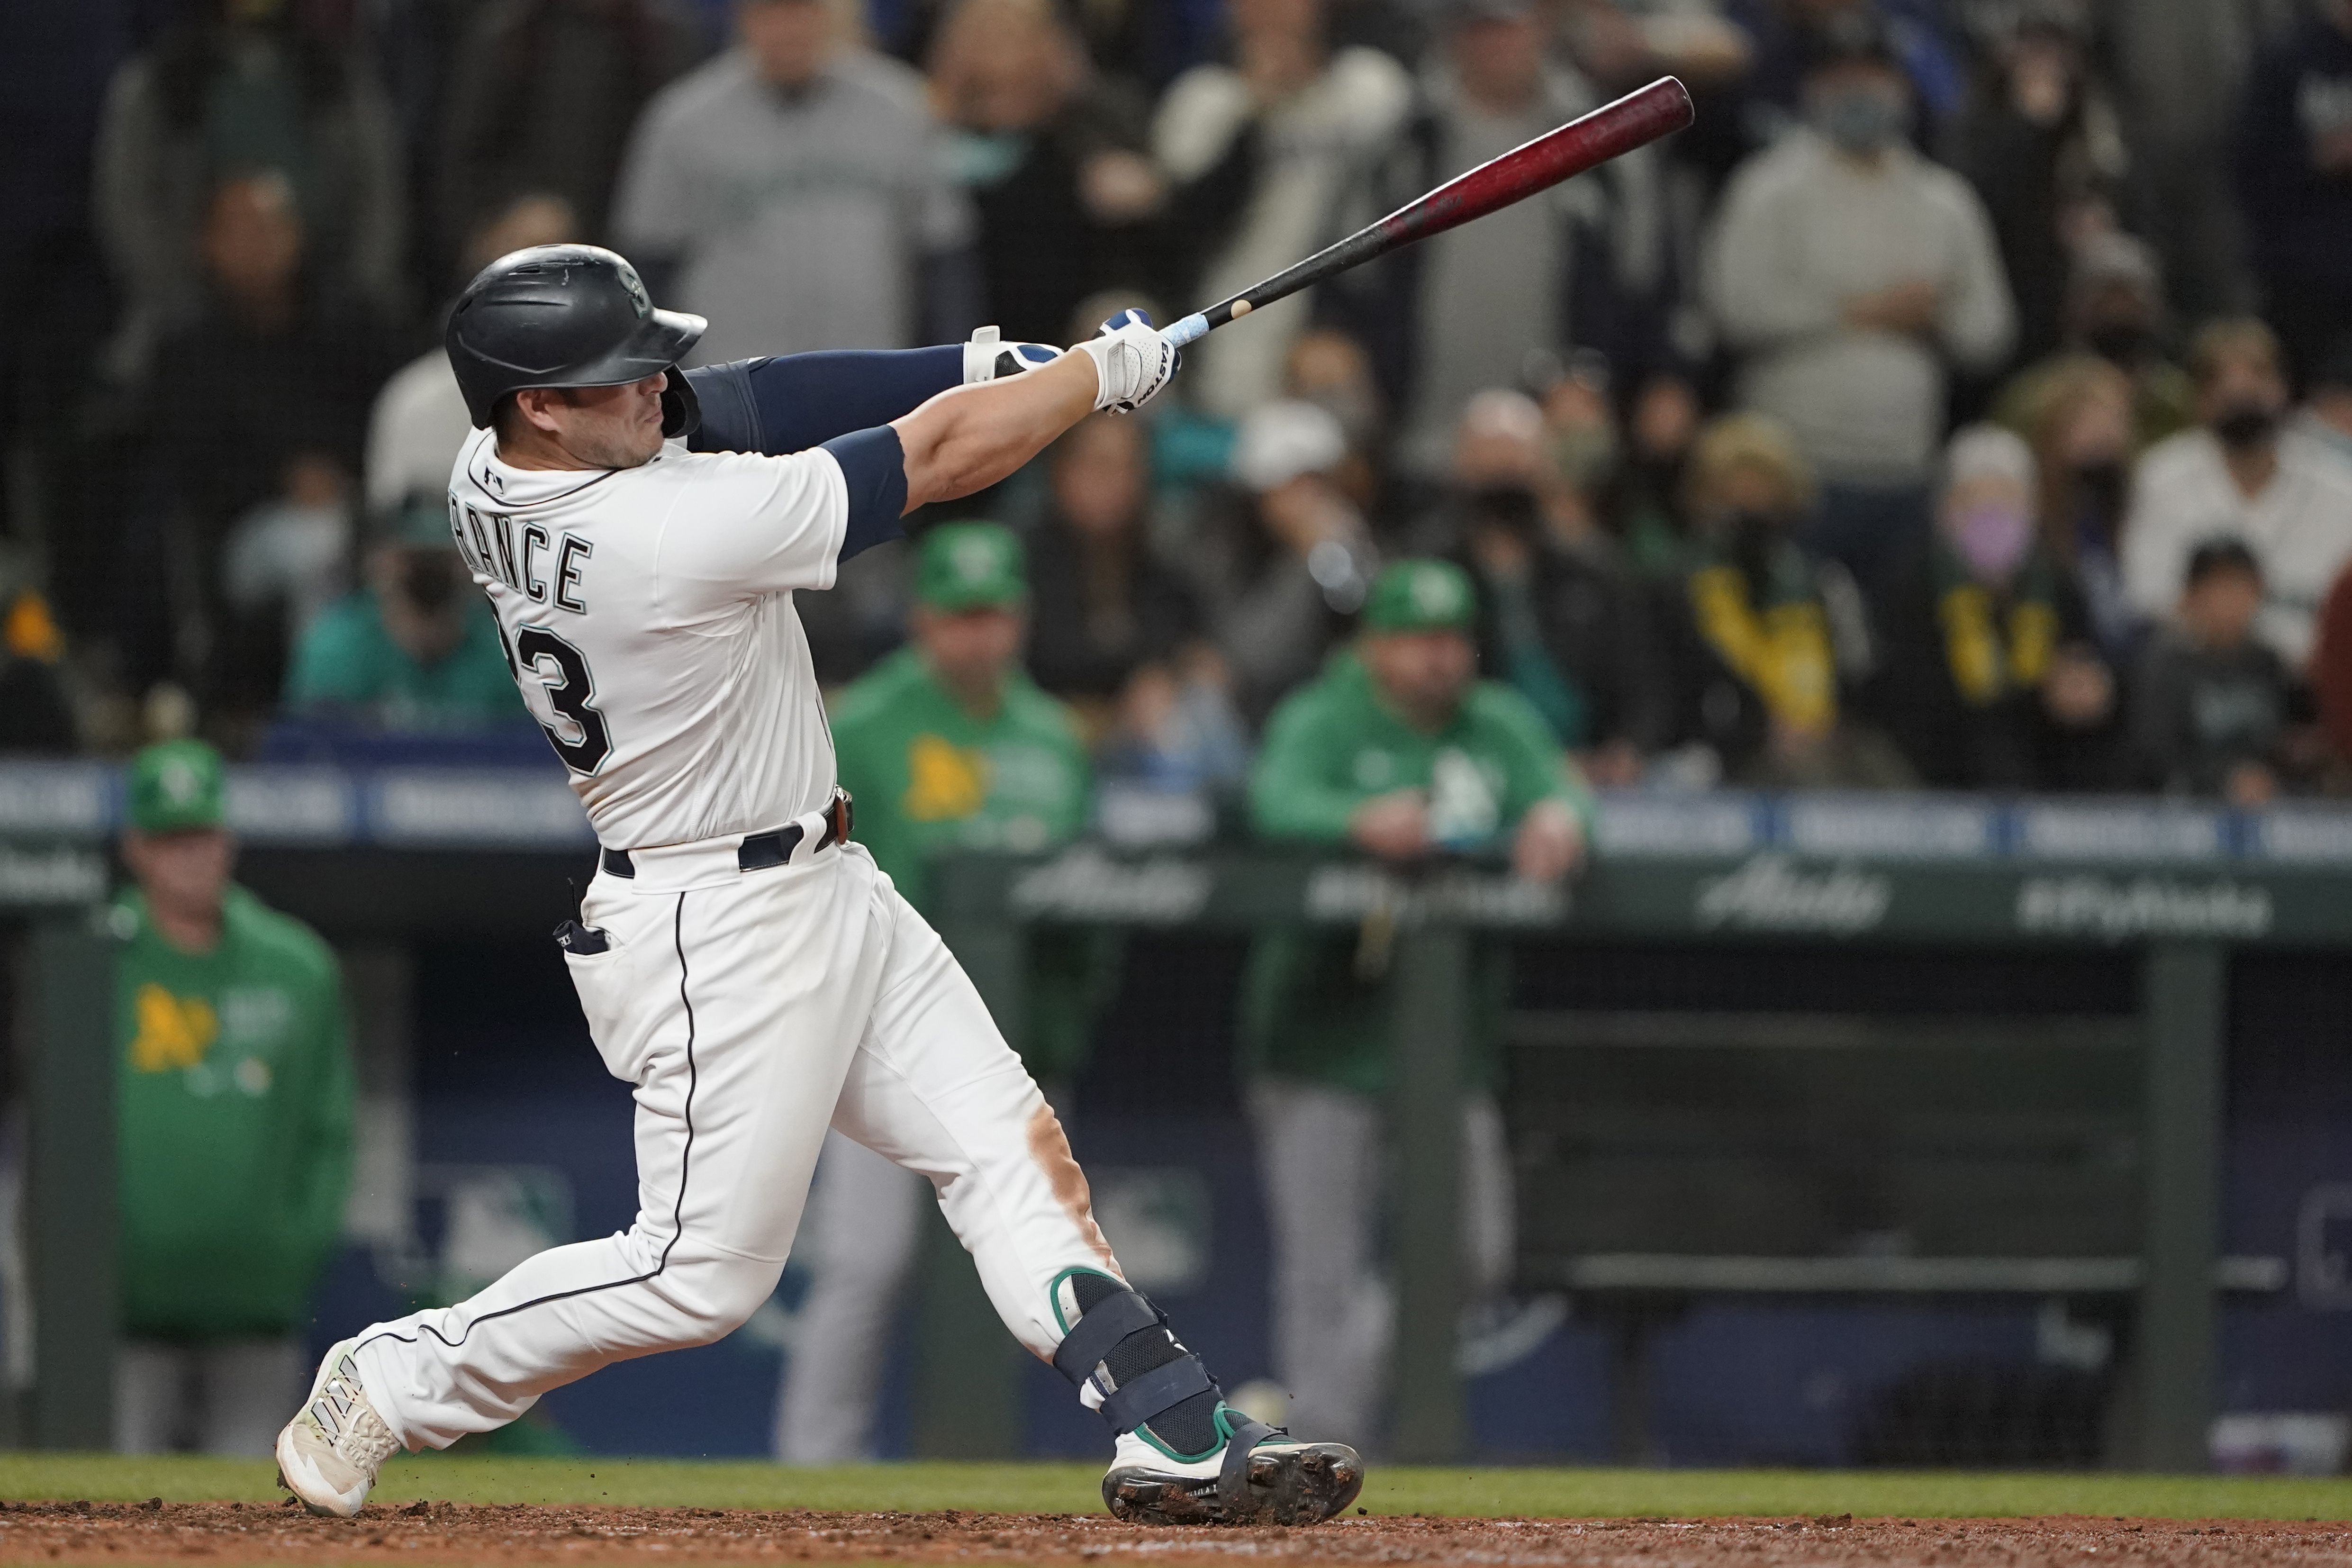 Watch: Mariners' Jarred Kelenic smacks home run for first career hit